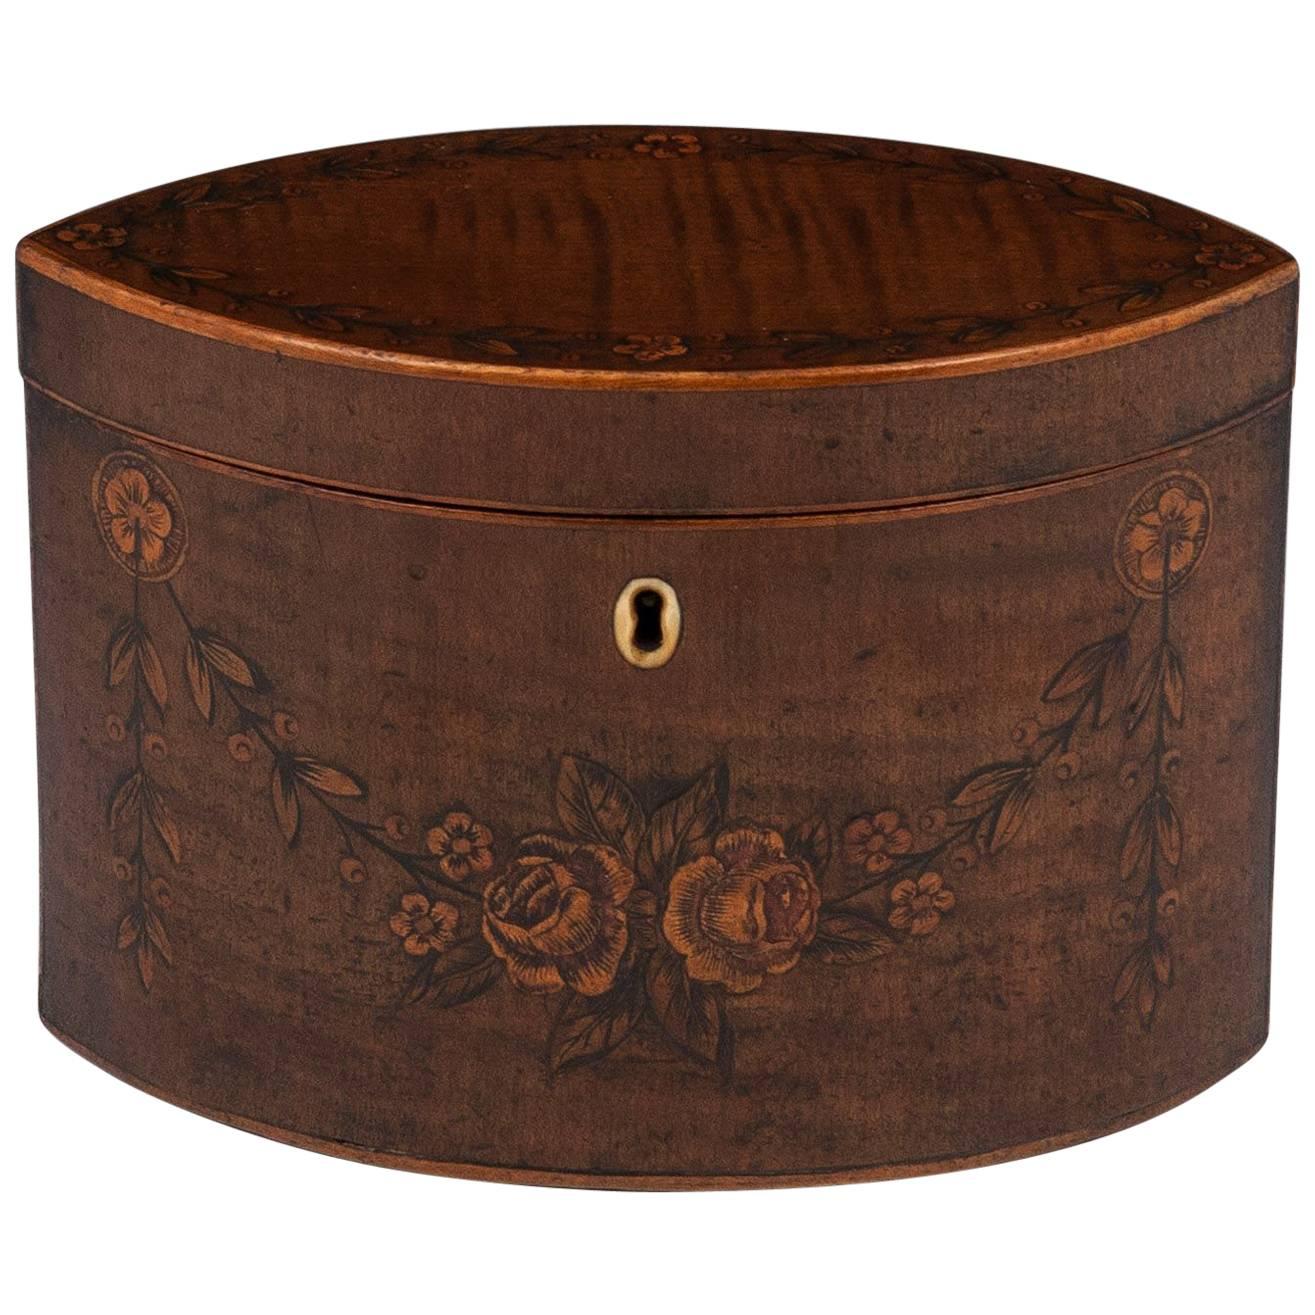 George III 18th Century Period Harewood Inlaid 'Navette' Shaped Tea Caddy For Sale